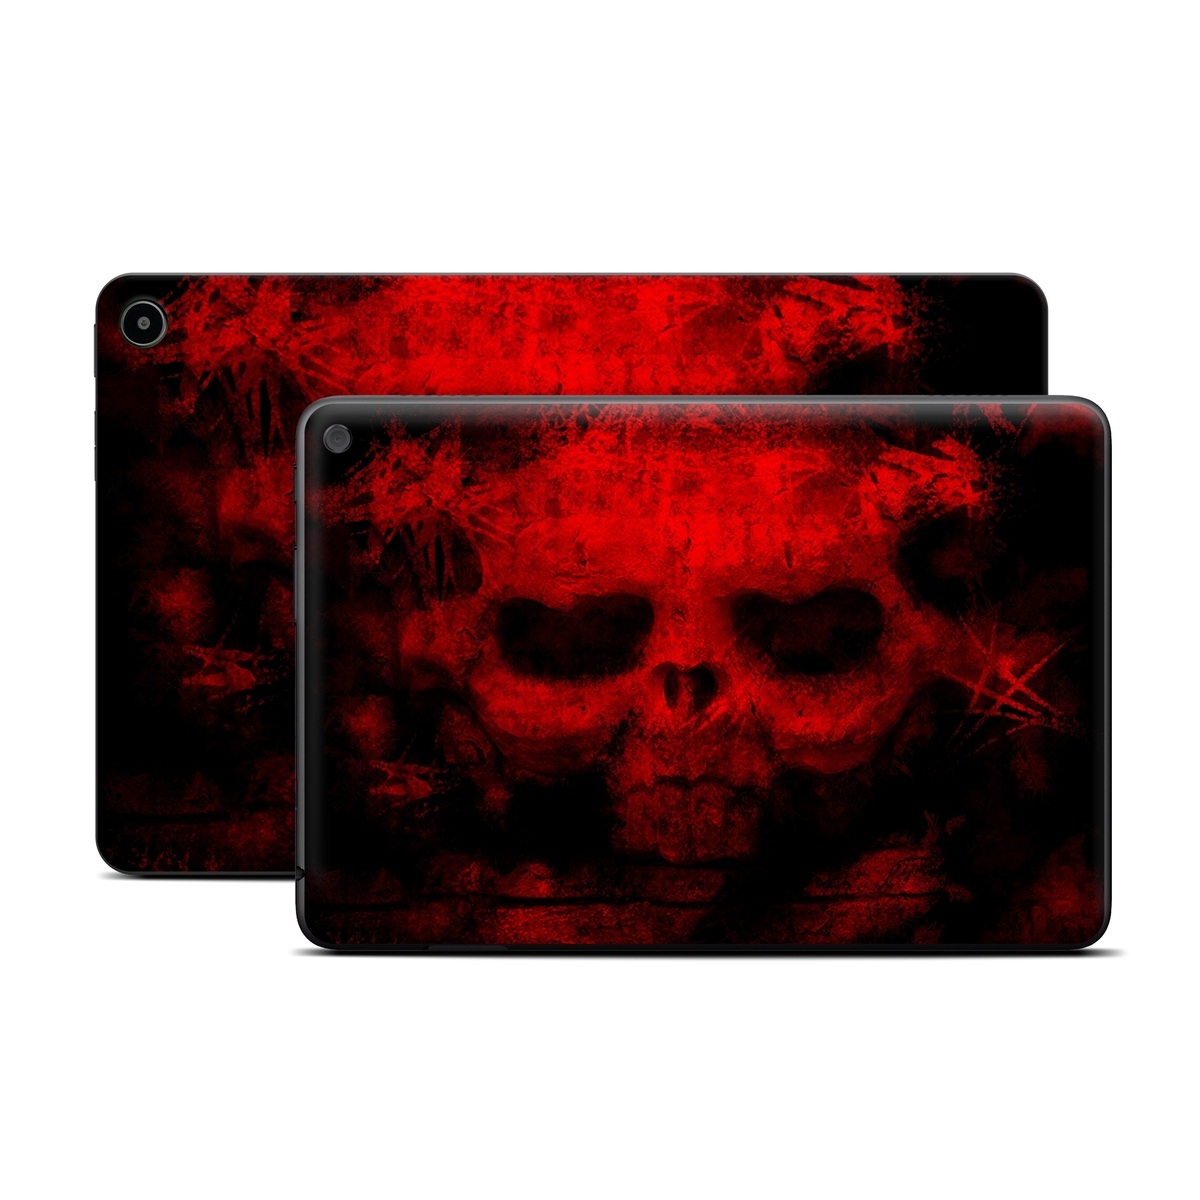 Amazon Fire Tablet Series Skin Skin design of Red, Skull, Bone, Darkness, Mouth, Graphics, Pattern, Fiction, Art, Fractal art, with black, red colors